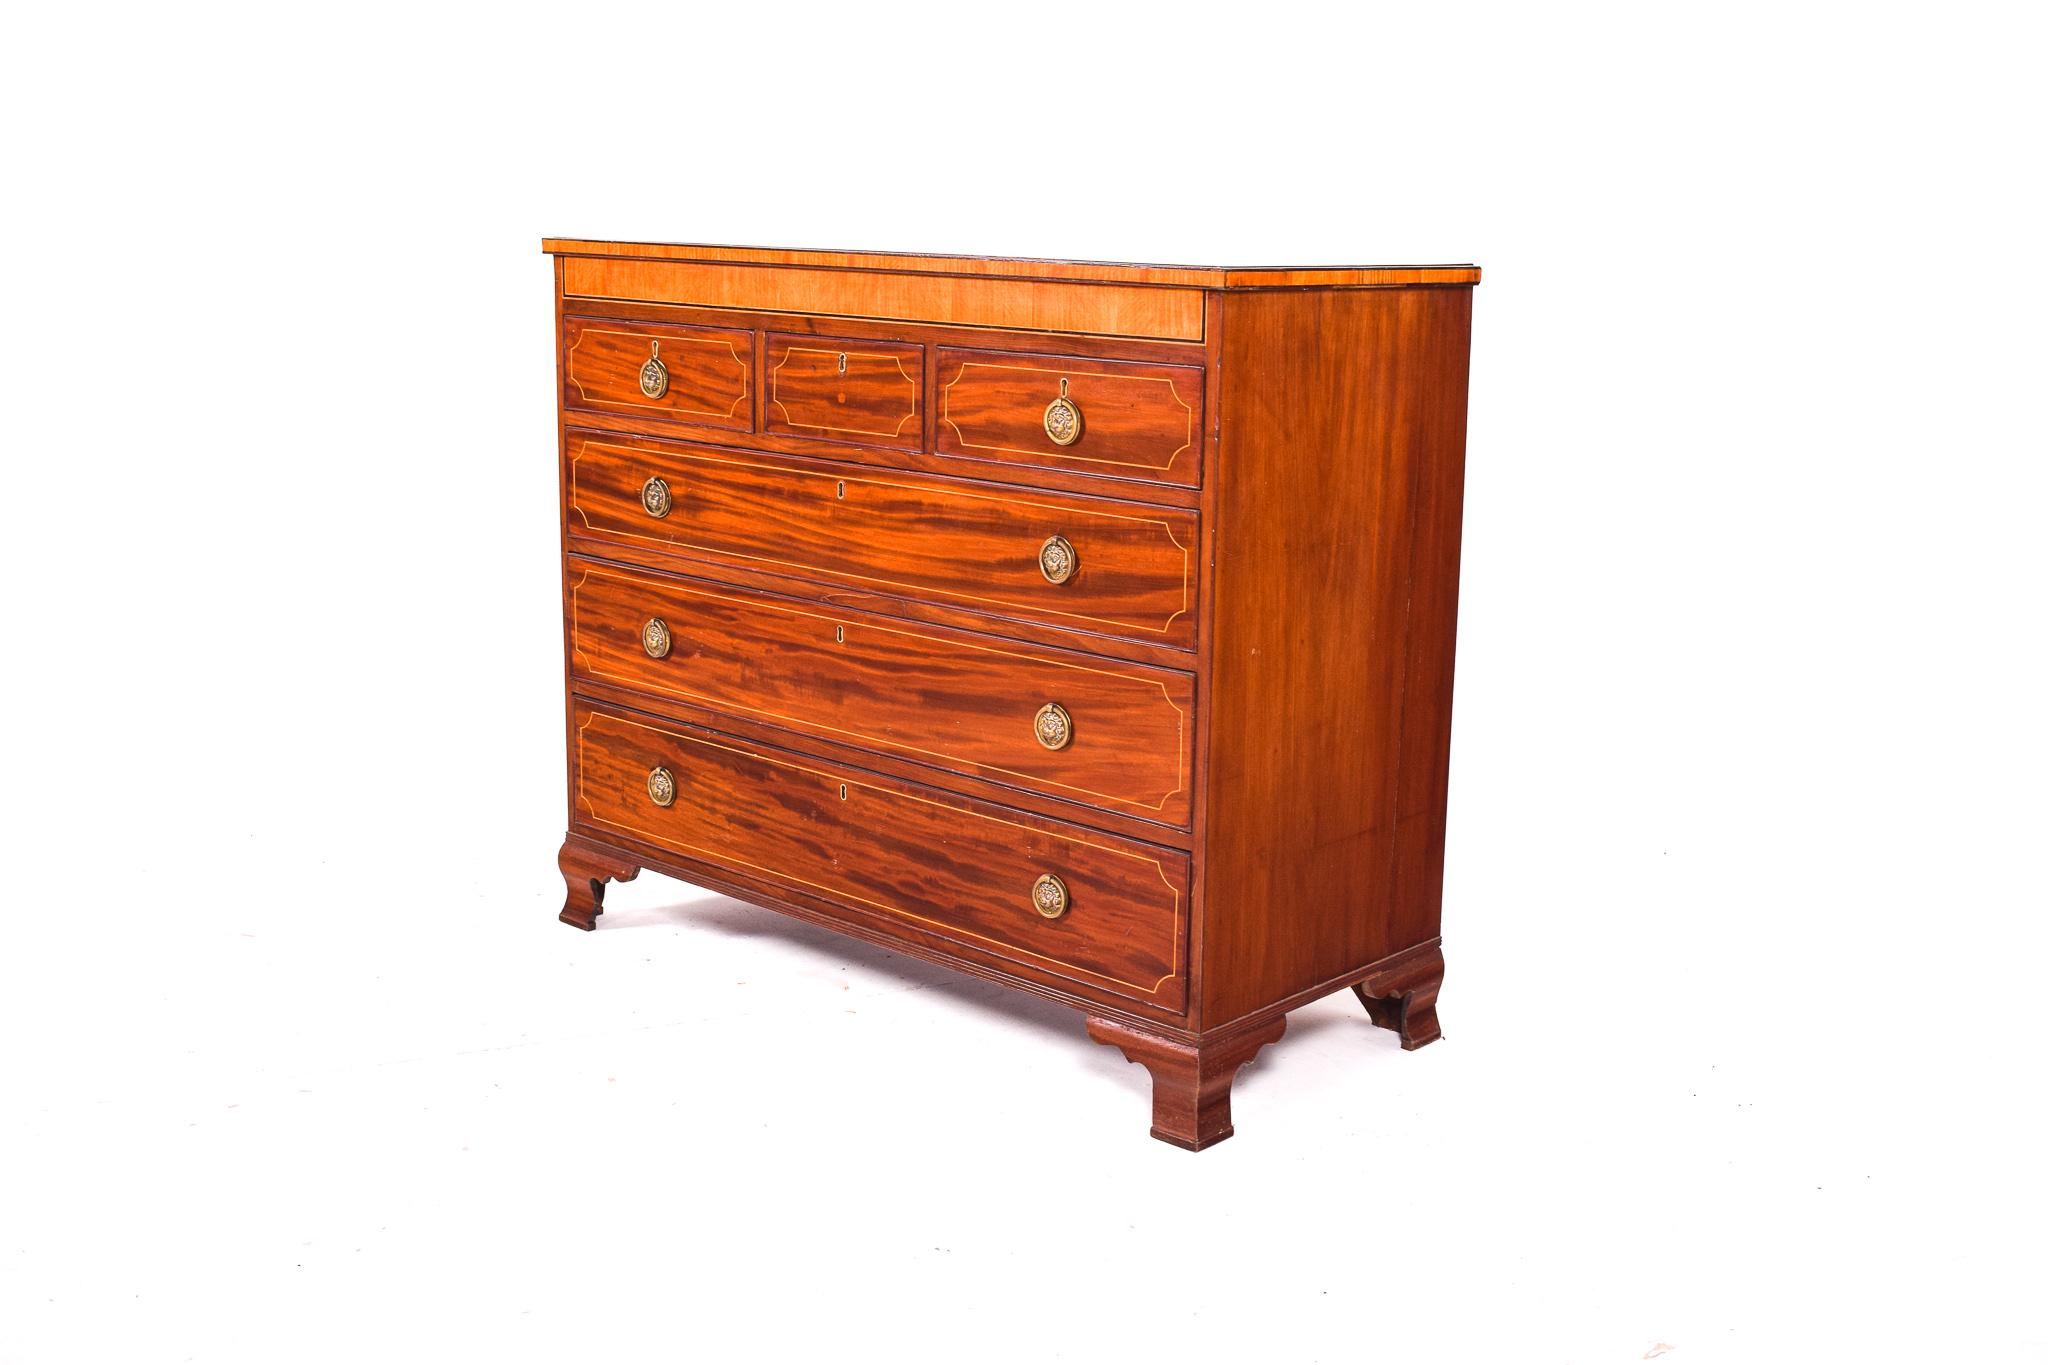 This D. Maria style chest features six drawers. The drawer fronts have flame/crotch mahogany veneers, with stringing and crossbanded mahogany borders. The hardware is of the period, and the correct style for the piece in yellow metal.